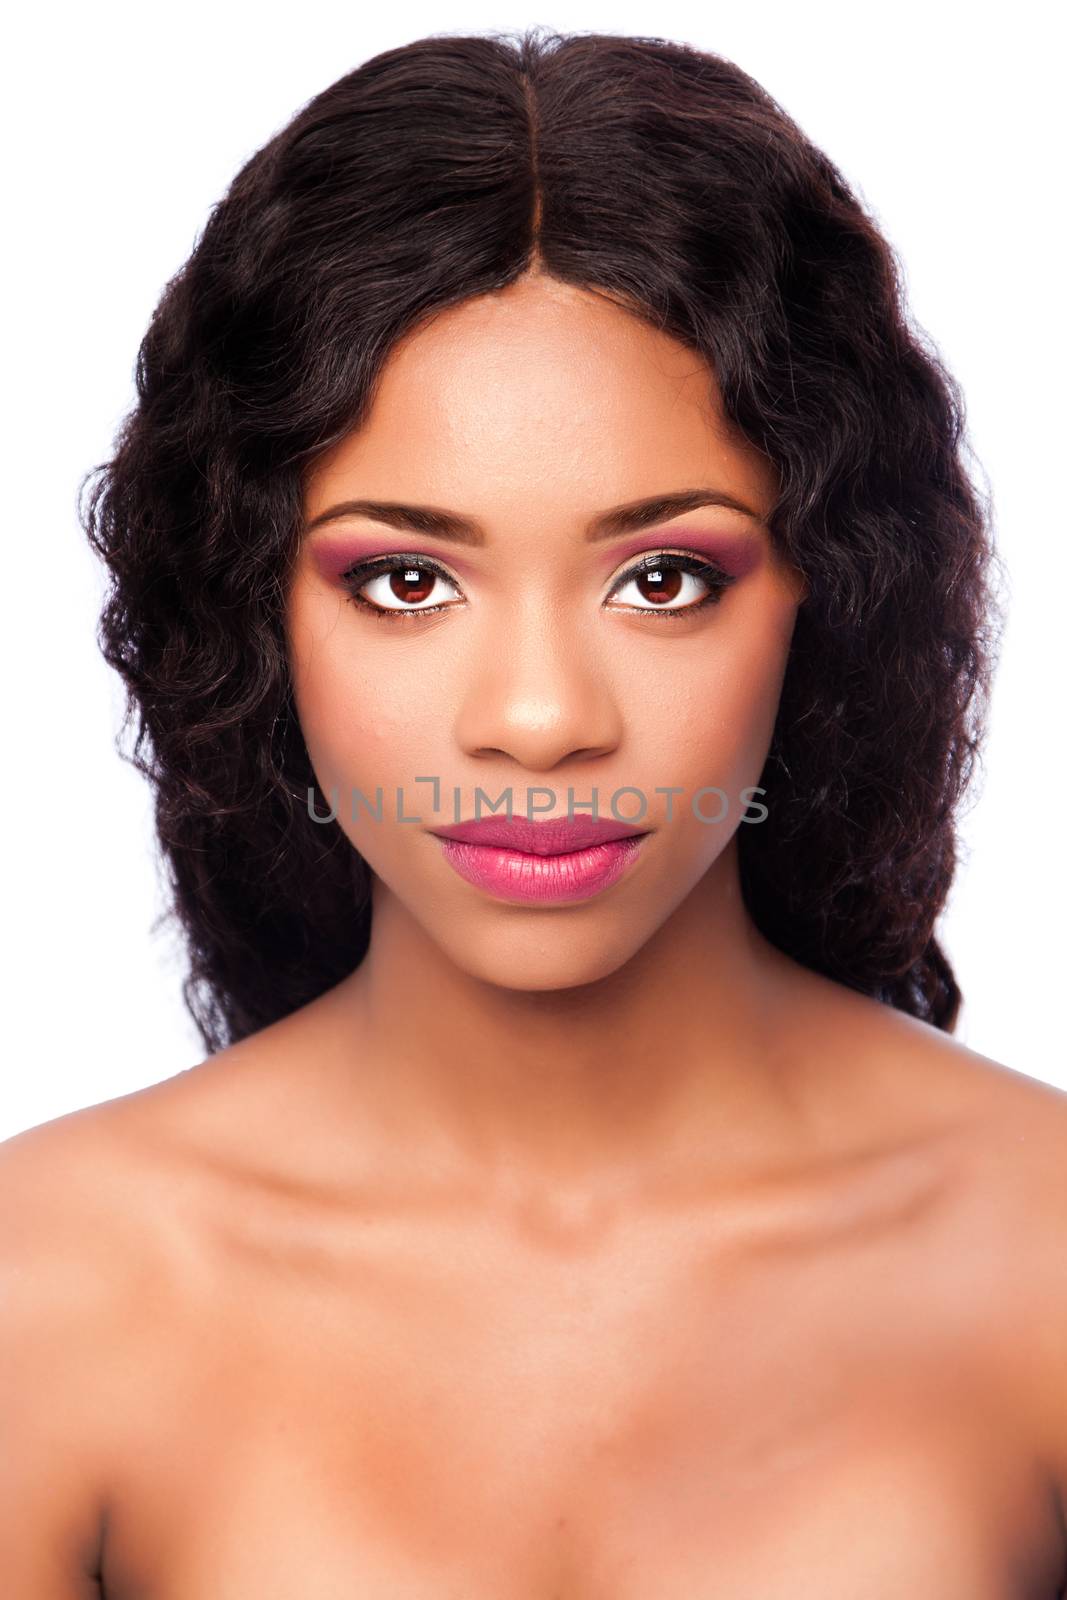 African beauty face with makeup and curly hair by phakimata